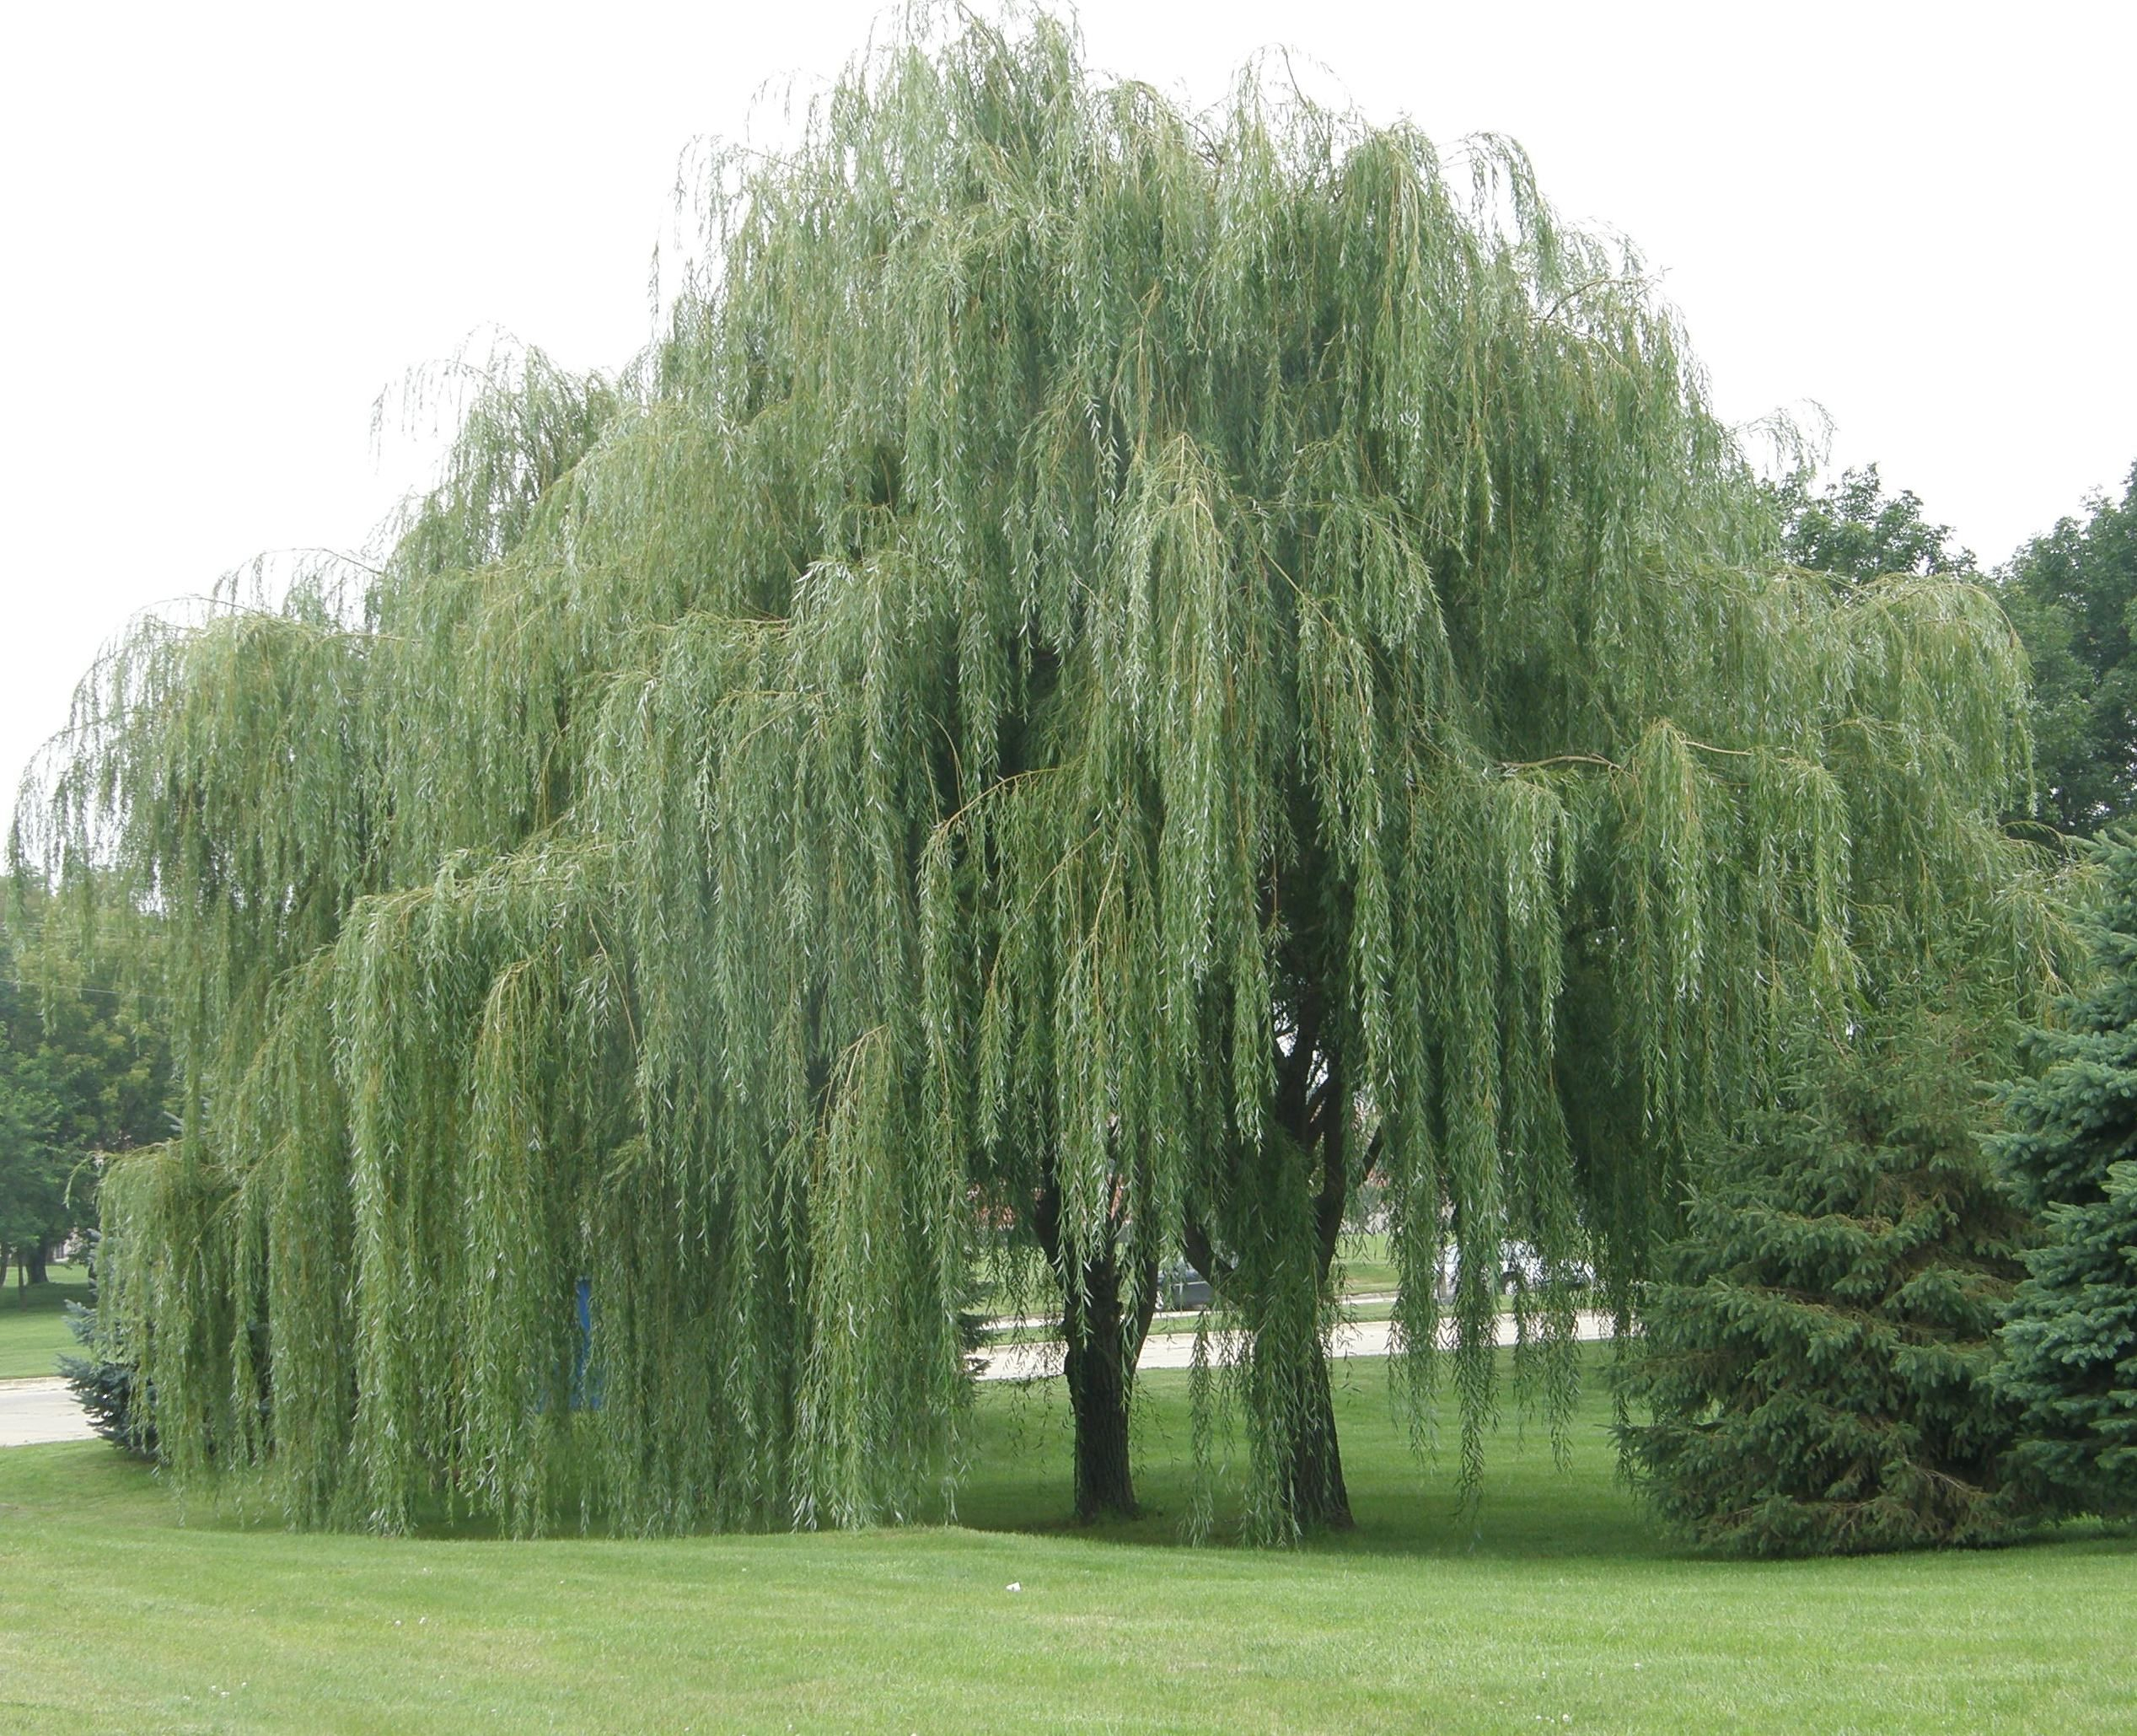 2535x2059 I \u003c3 willow trees! One of many of God's creations! | Weeping willow tree, Weeping willow, Willow tree